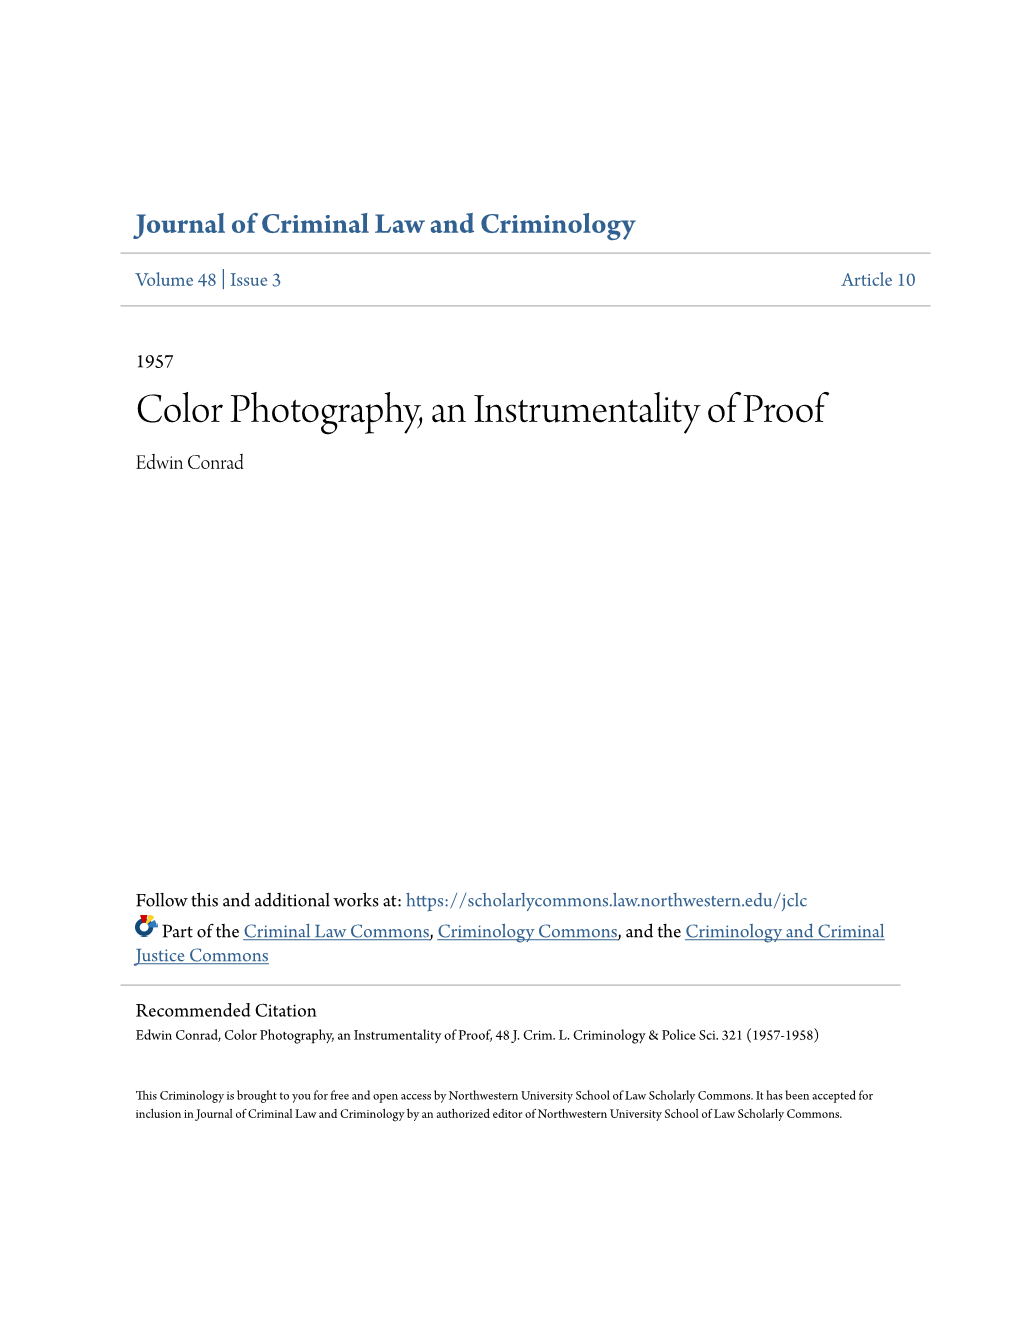 Color Photography, an Instrumentality of Proof Edwin Conrad